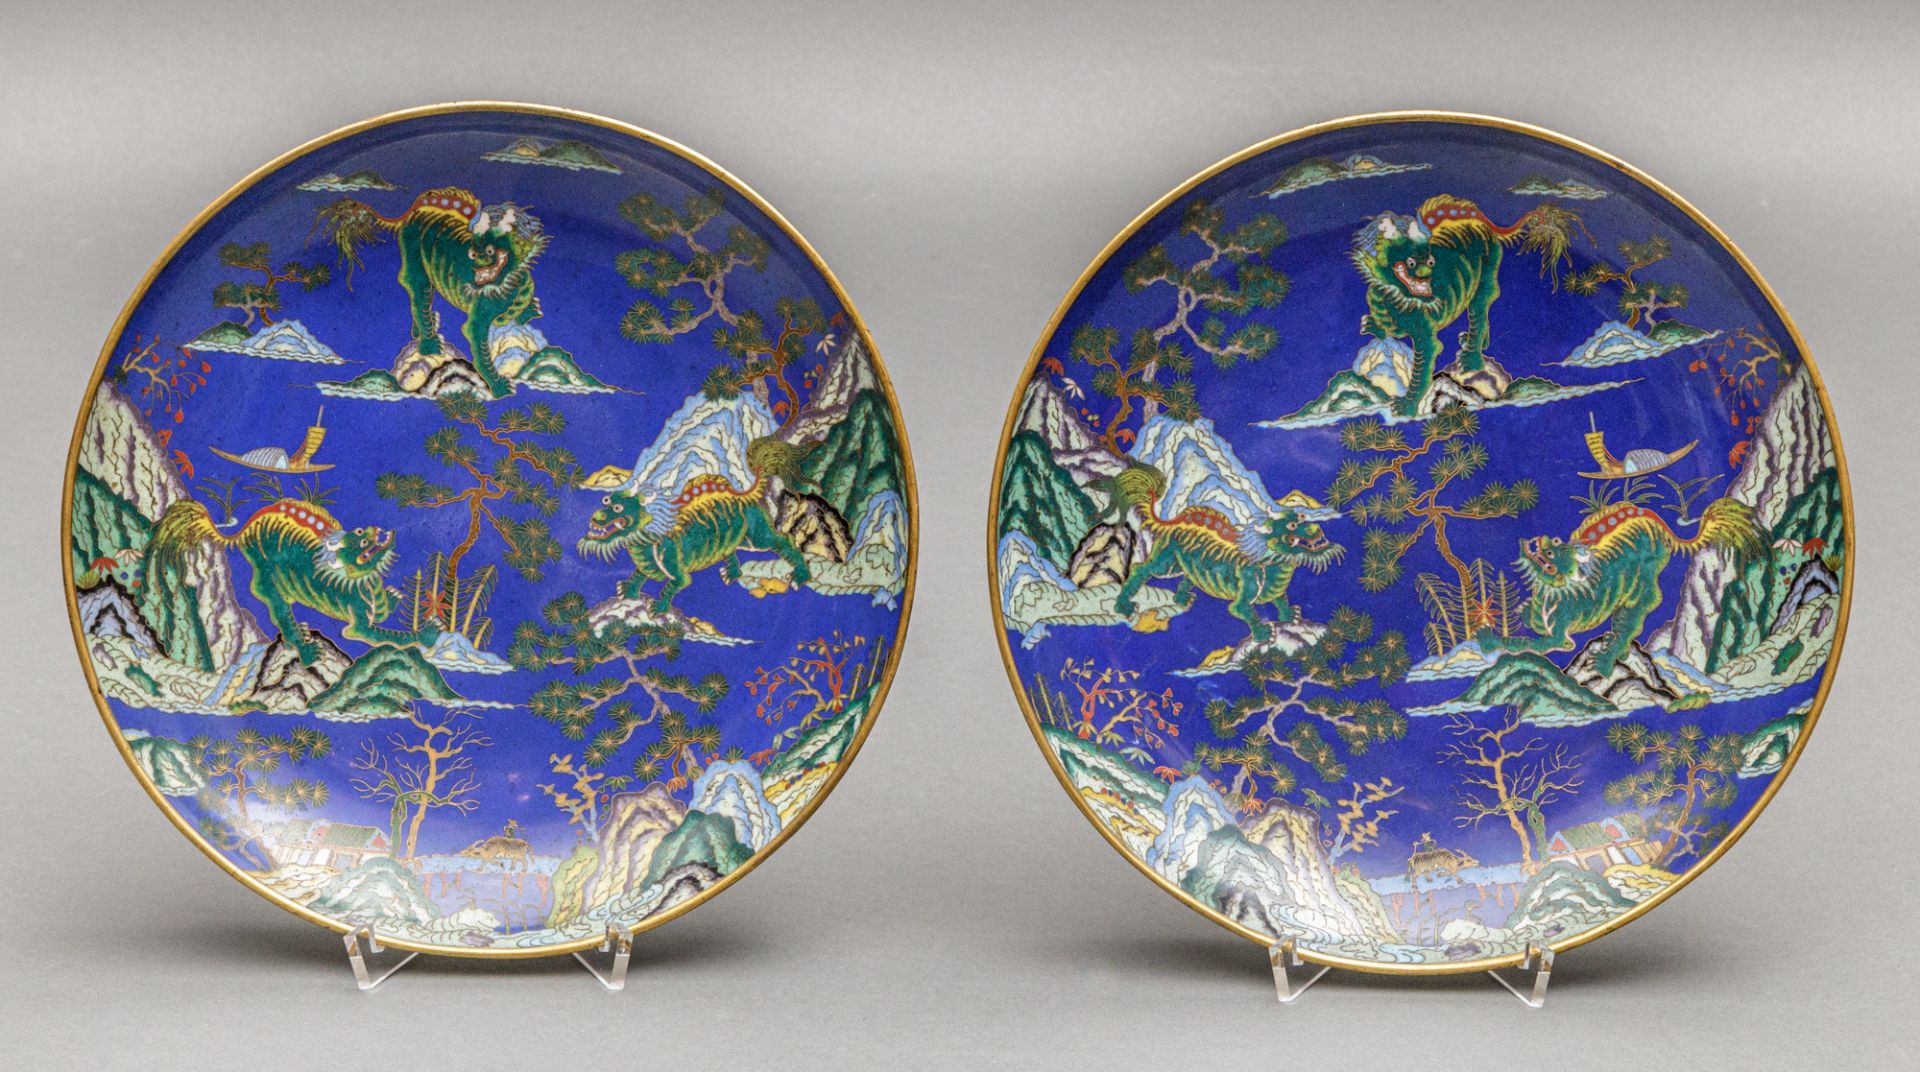 Paar Cloisonné Teller, China, wohl Qing Dynastie, 1644-1911 - Image 5 of 5